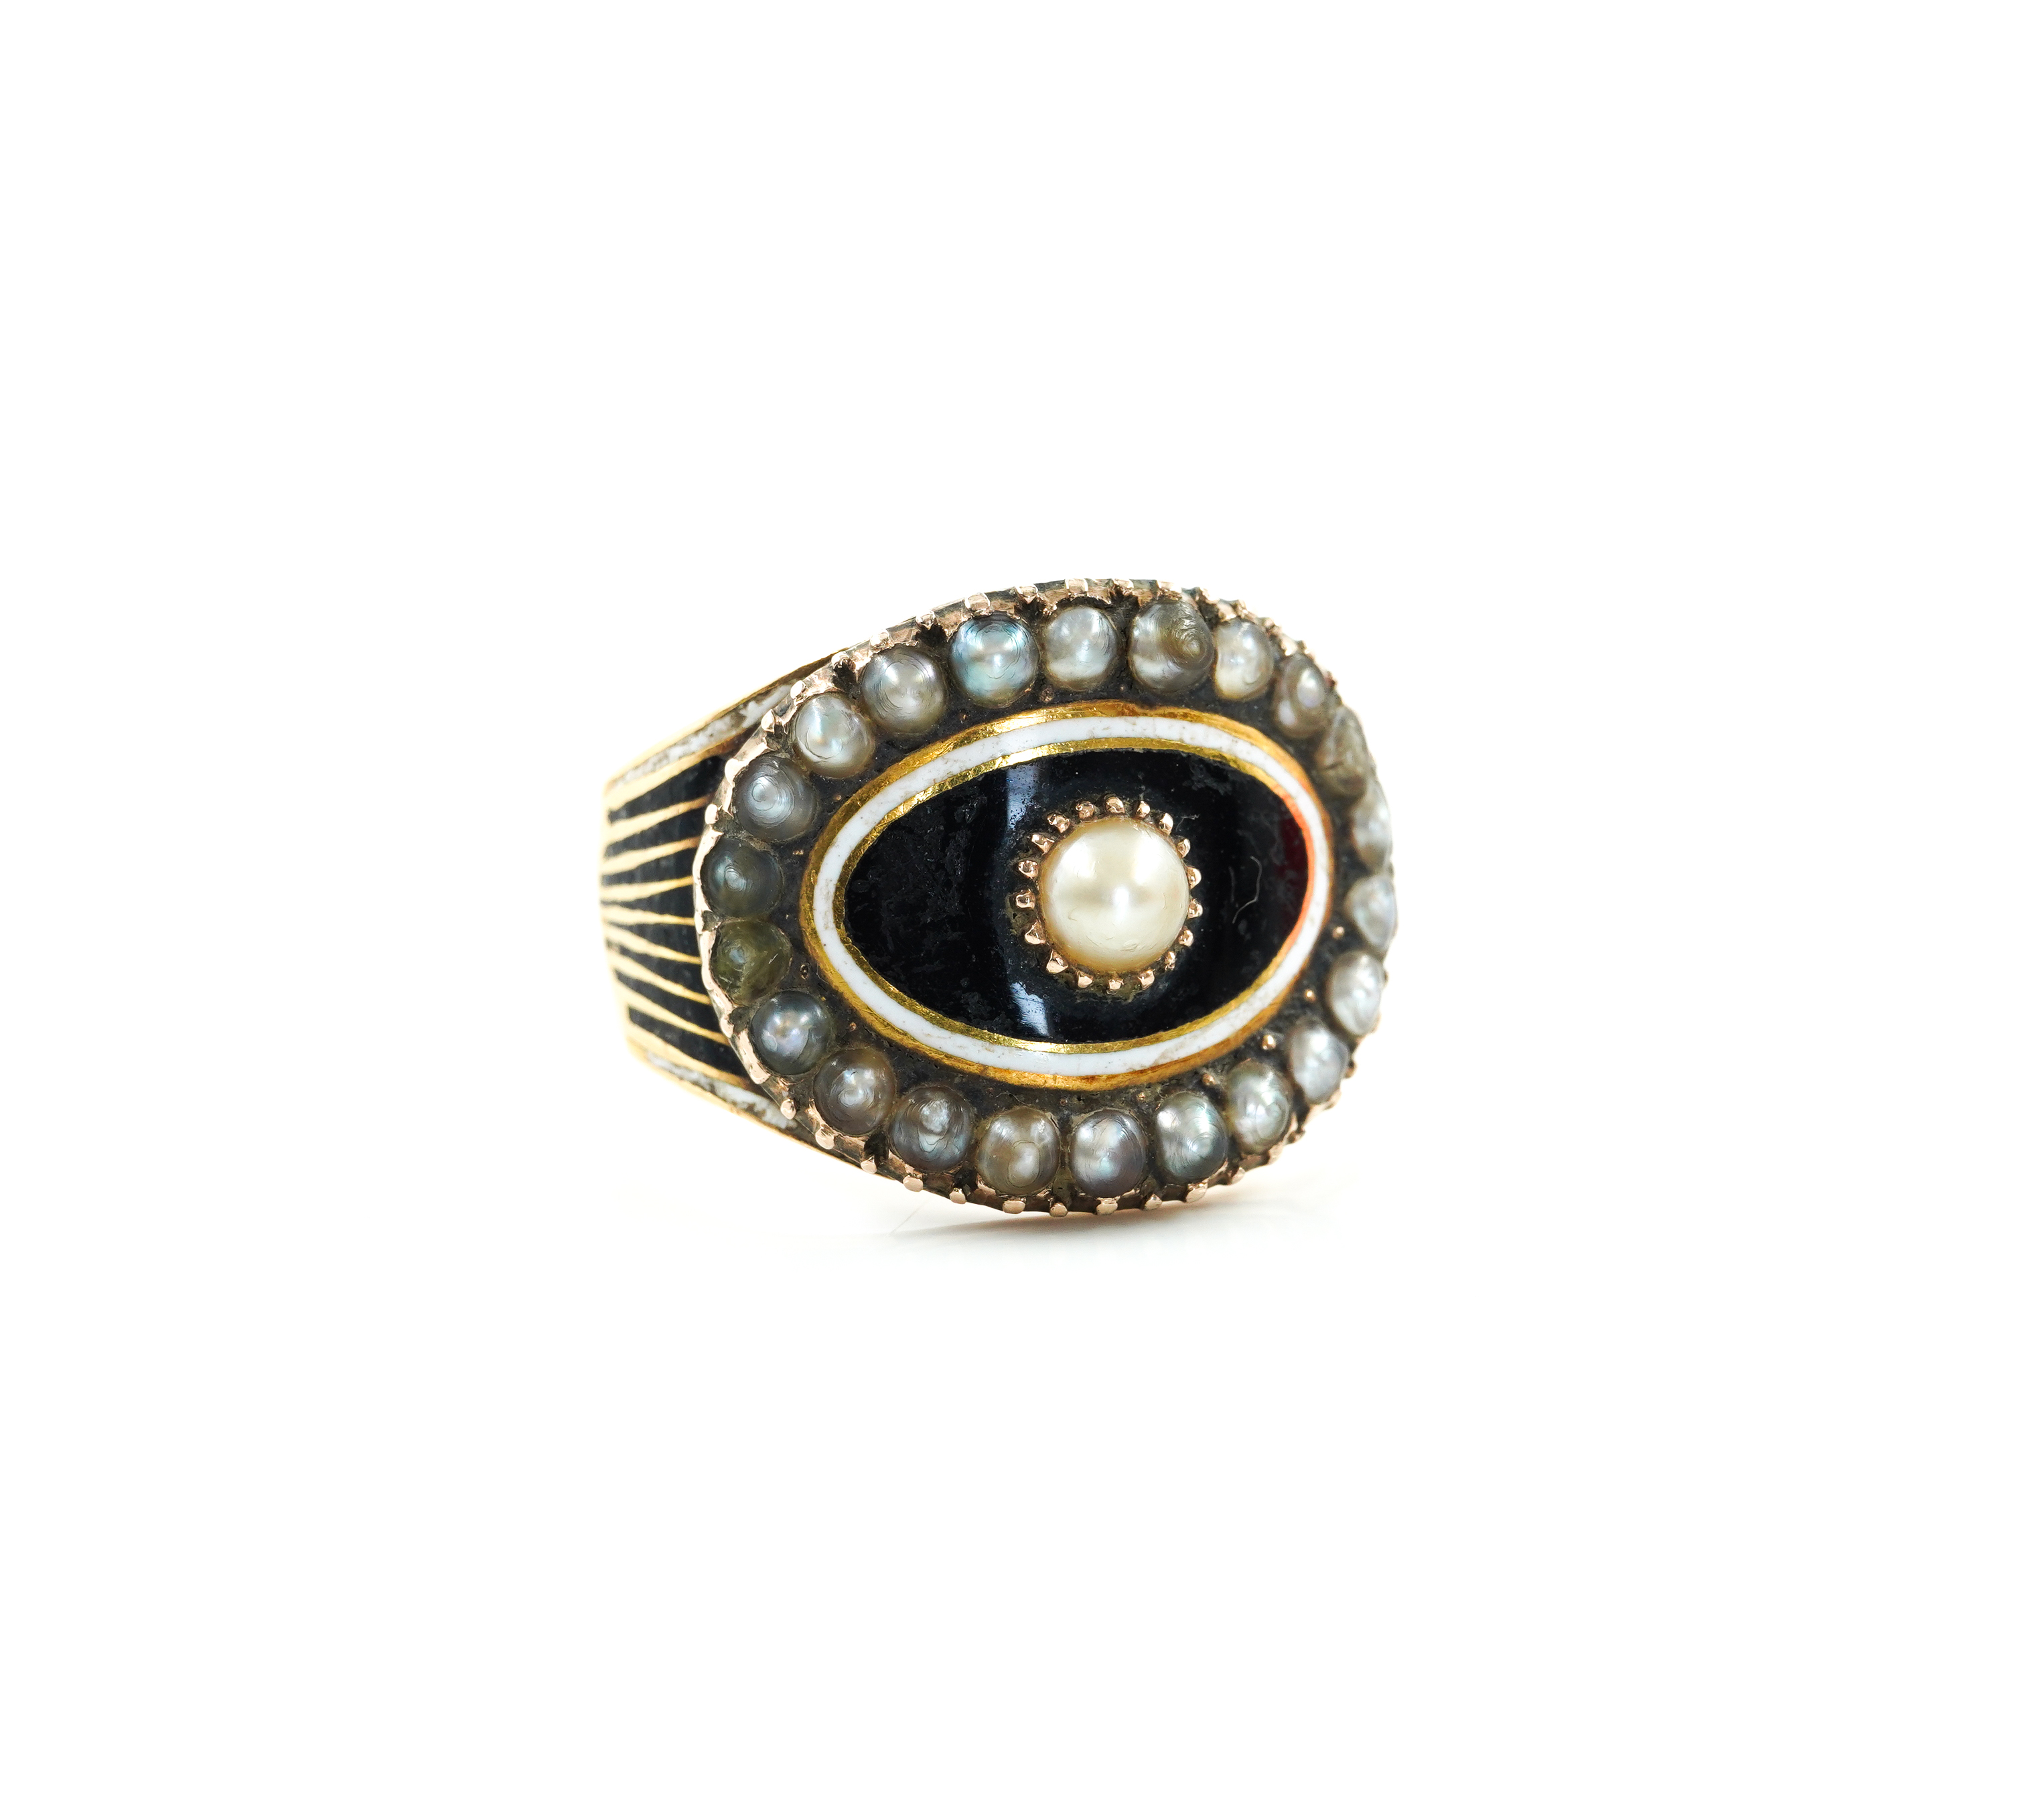 A LATE 18TH CENTURY GOLD, ENAMELLED AND HALF PEARL SET MOURNING RING